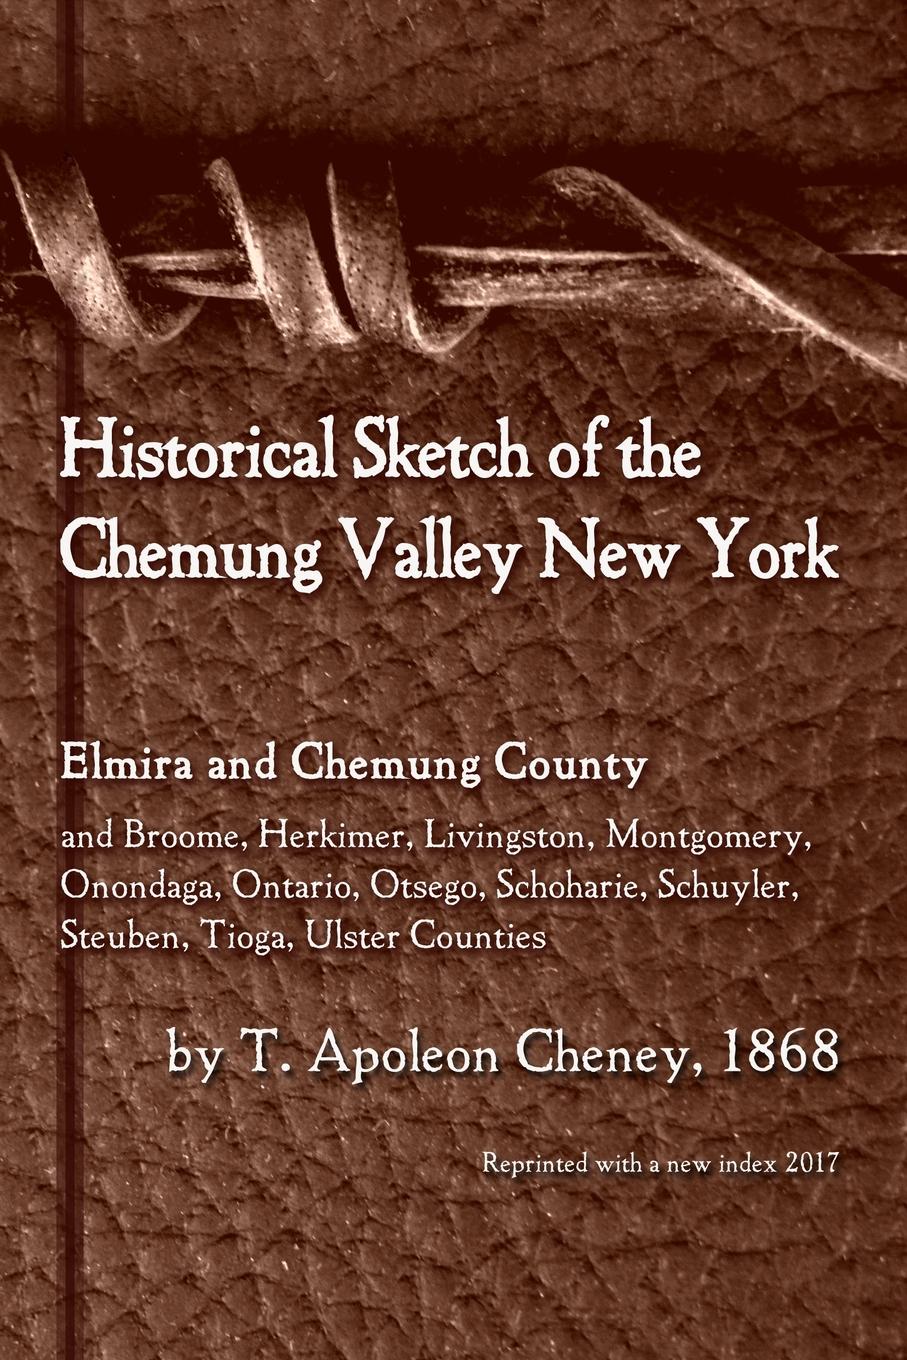 T. Apoleon Cheney Historical Sketch of the Chemung Valley, New York. Elmira and Chemung County, and Broome, Herkimer, Livingston, Montgomery, Onondaga, Ontario, Otsego, Schoharie, Schuyler, Steuben, Tioga, Ulster Counties